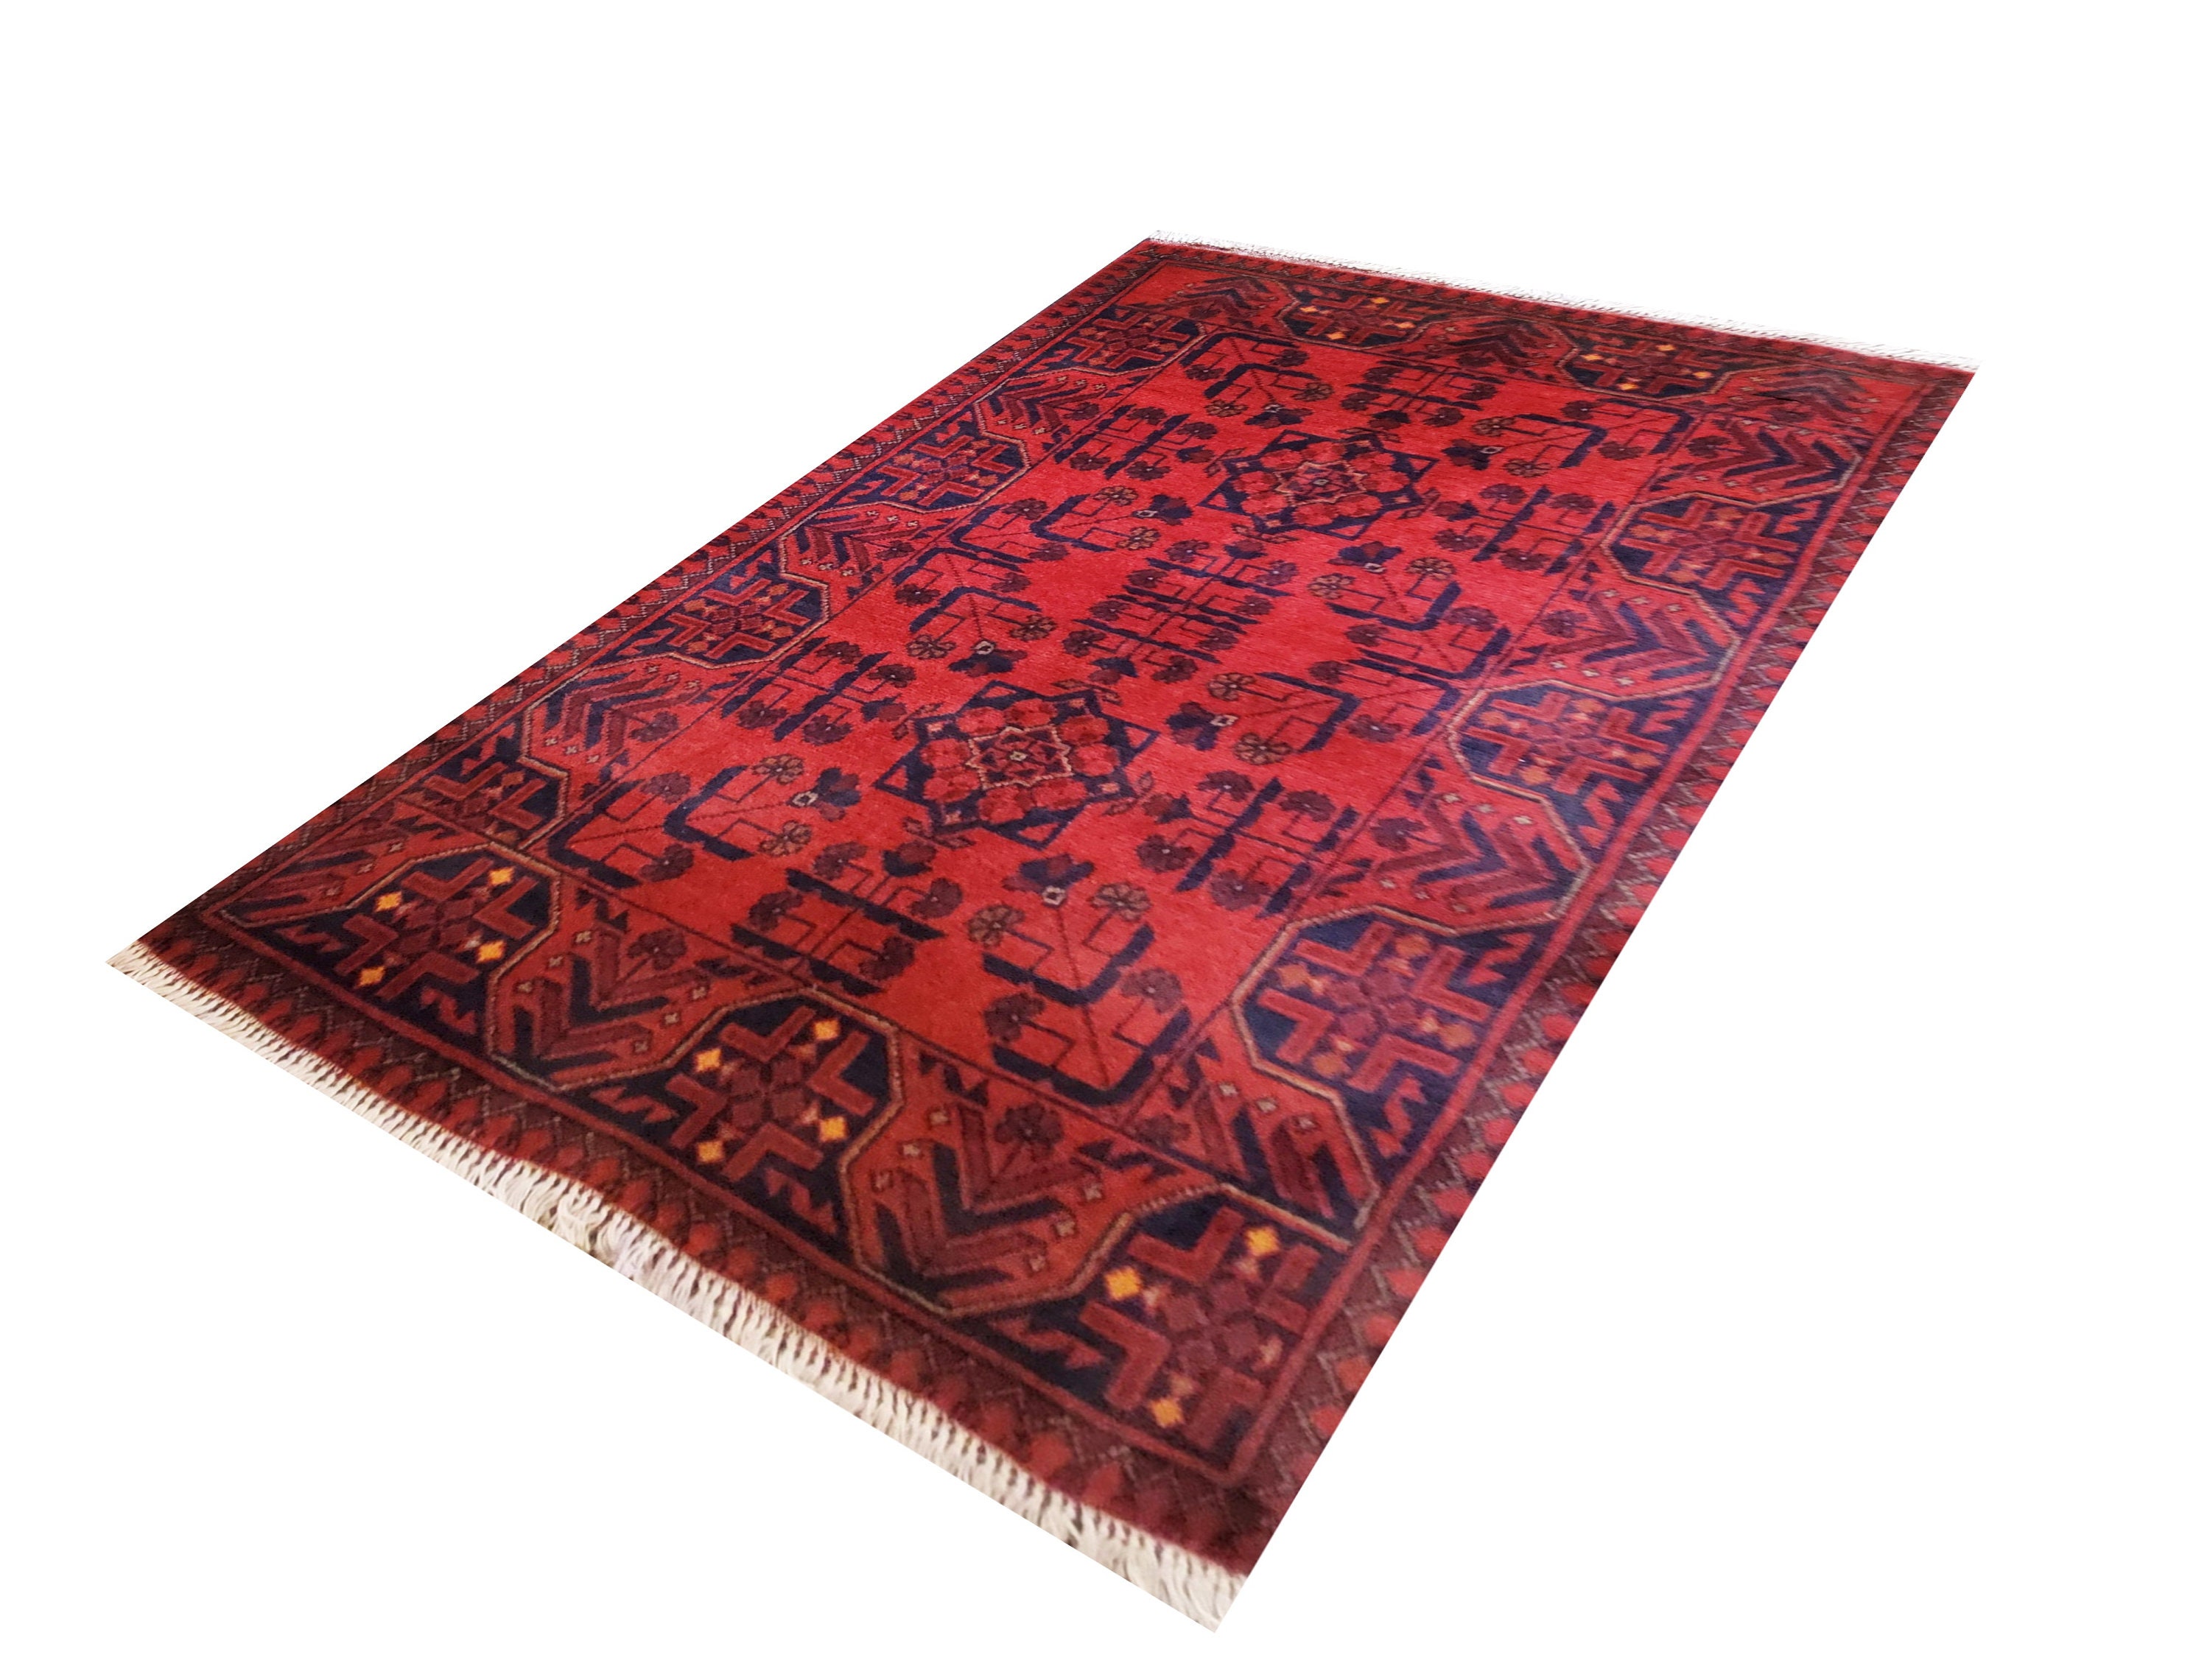 22517 - Royal Khal Mohammad Hand-Knotted/Handmade Afghan  Rug/Carpet/Traditional/Authentic/Size: 4'0 x 2'7